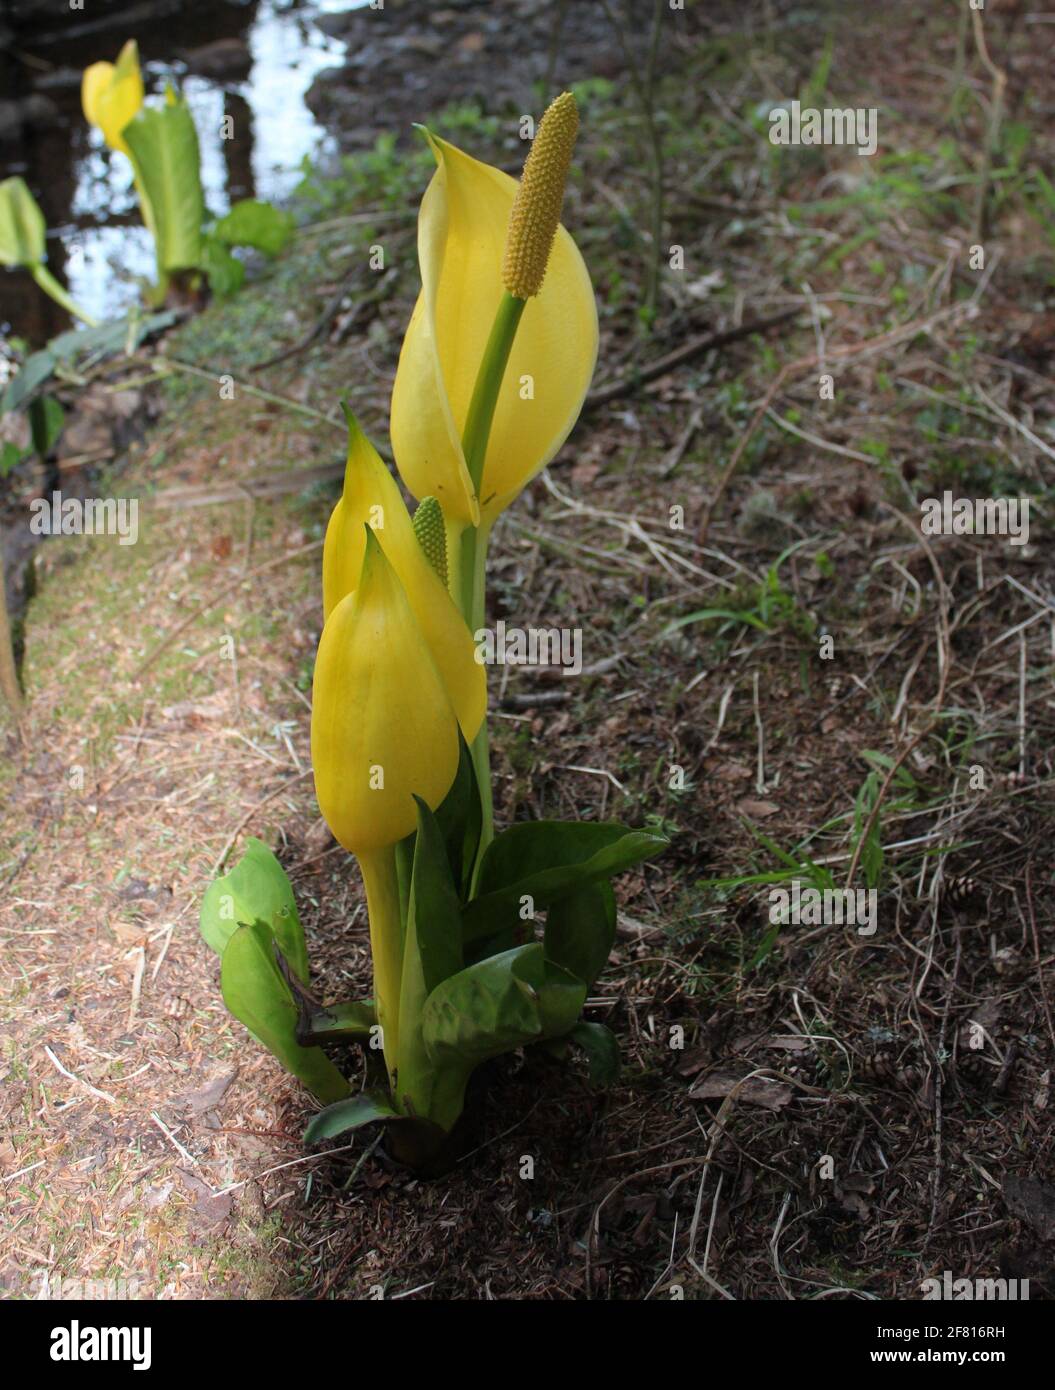 Close up of Skunk cabbage (Symplocarpus foetidus) flower and large leathery leaves. Spring plants found on nature trails and hikes. Images of spring. Stock Photo